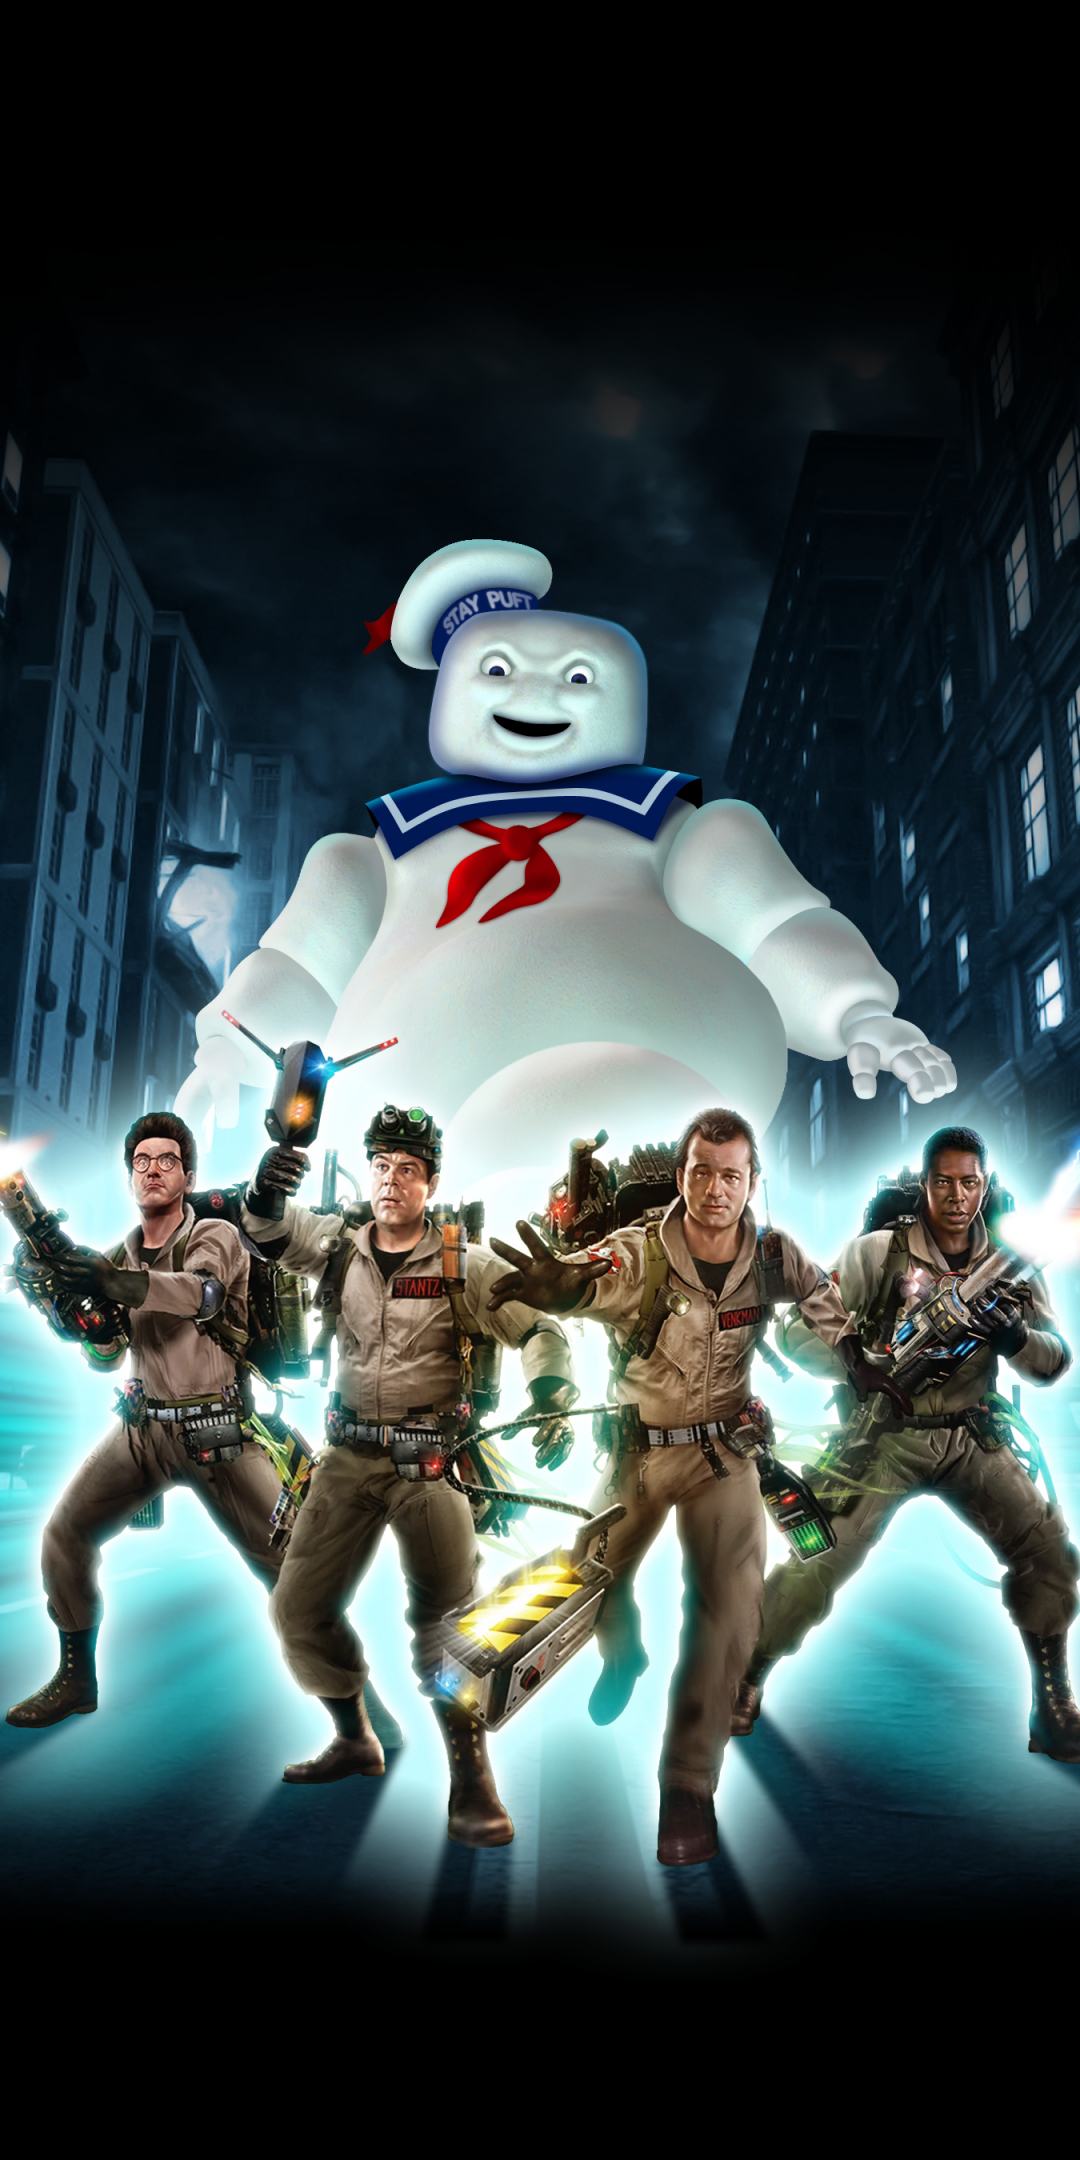 Ghostbusters, movie poster, classic movie, 1080x2160 wallpaper